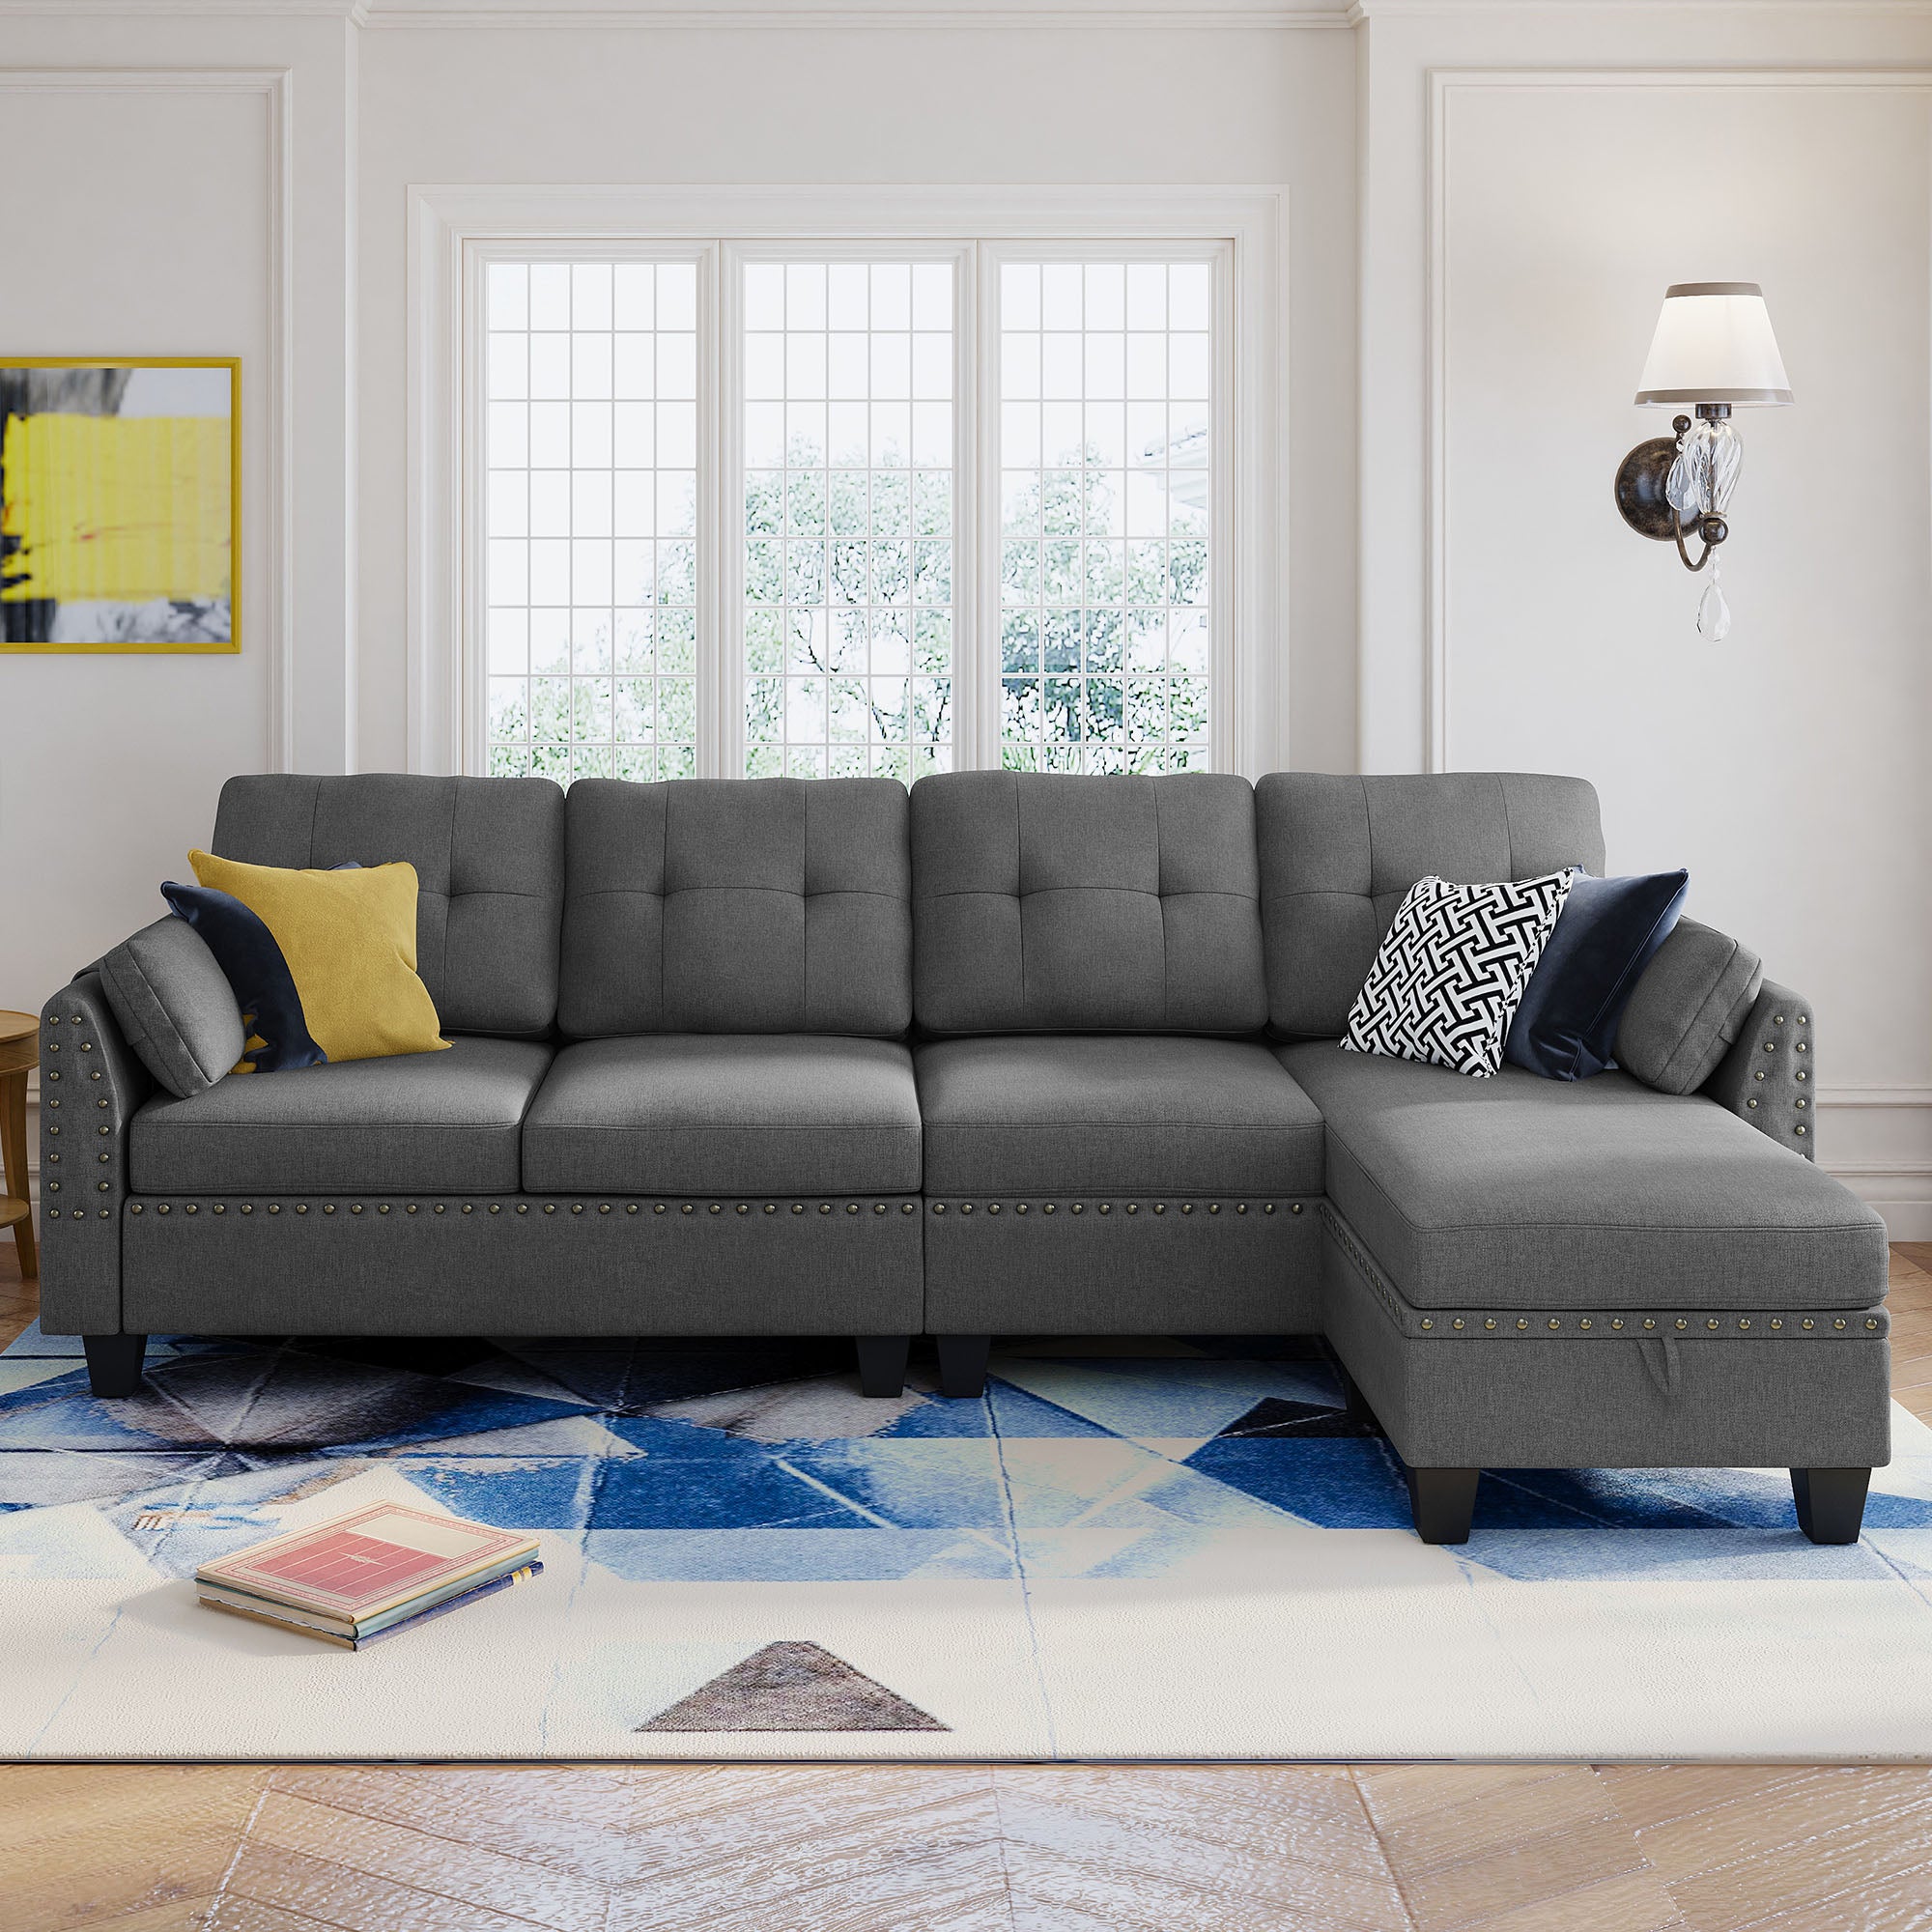 HONBAY 4-Seat L-Shaped Sectional Sofa with Storage Chaise